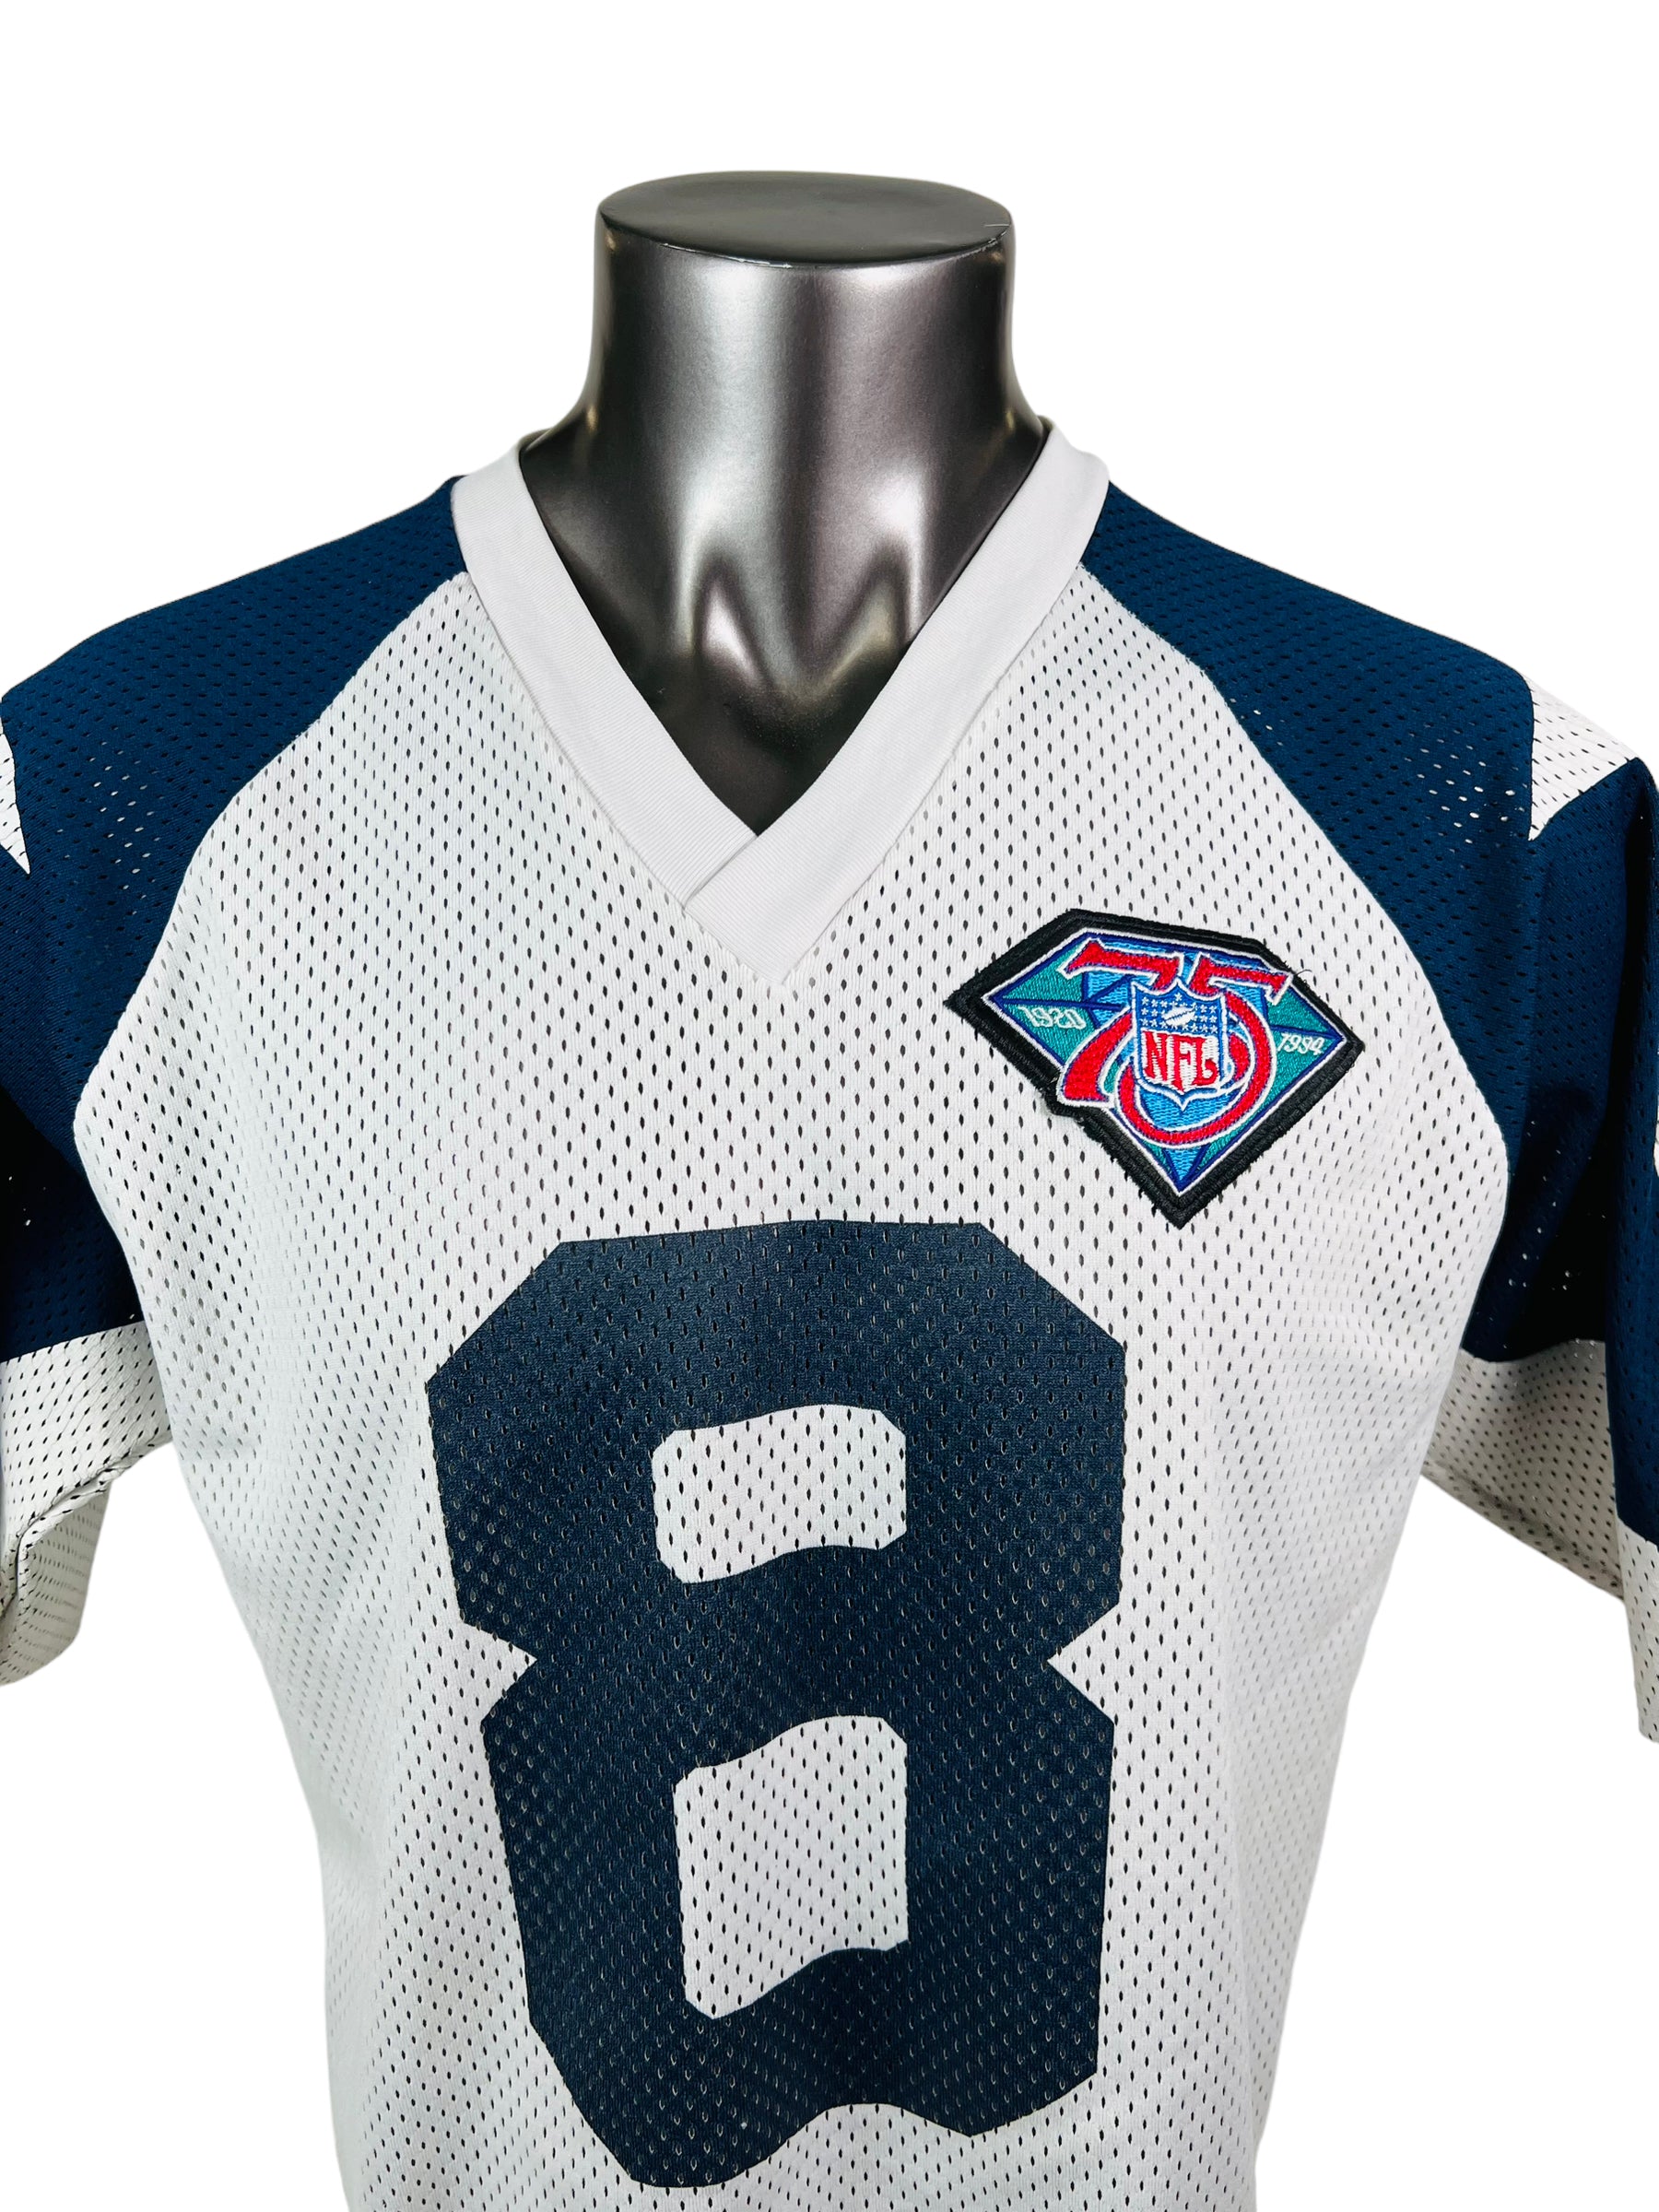 Troy Aikman cowboys jersey NFL 75th anniversary